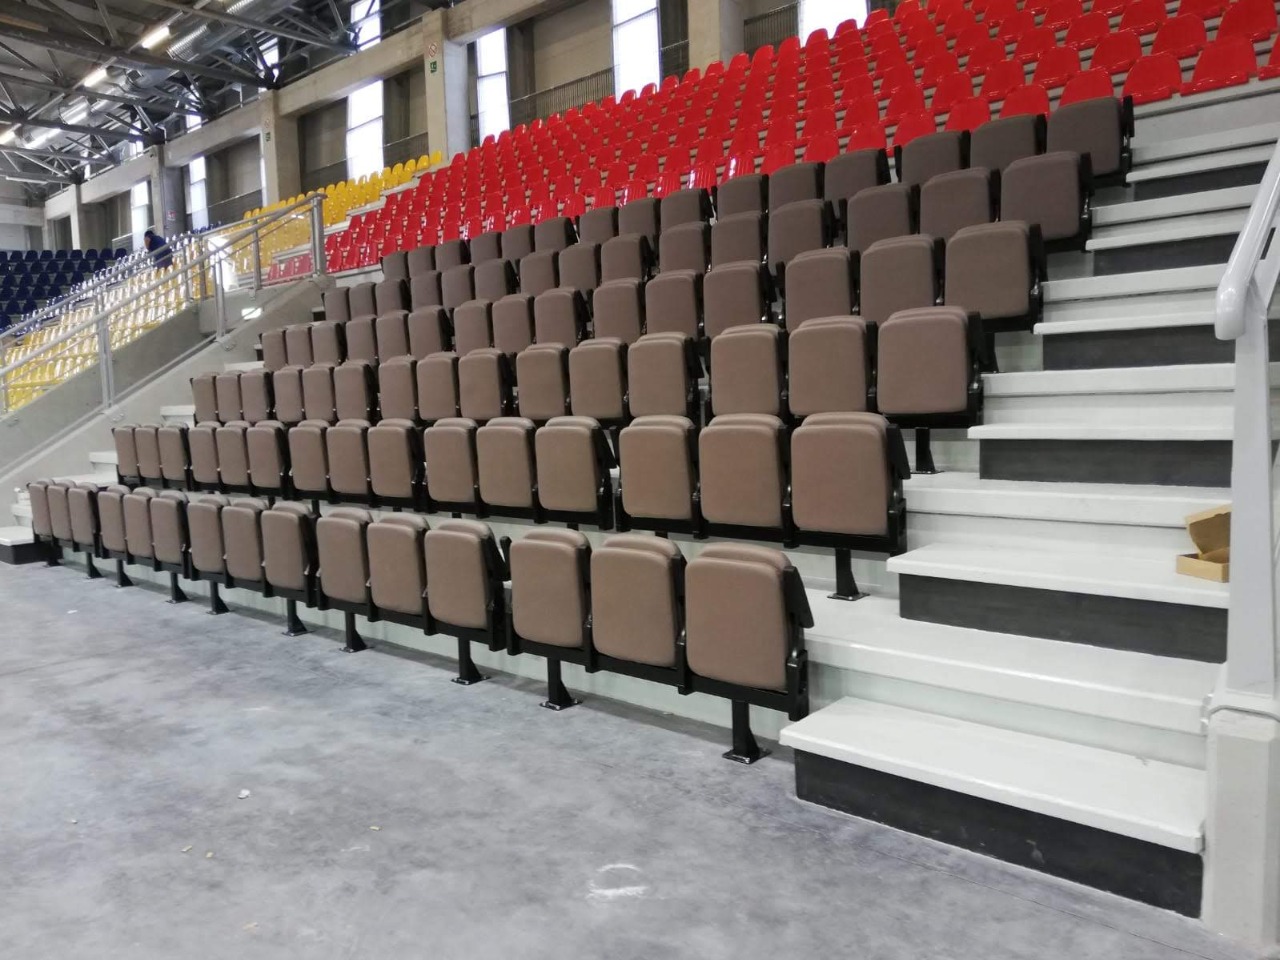 Gallery foto n.2 SET seats and TOP CLASS seats - Palacoccia 